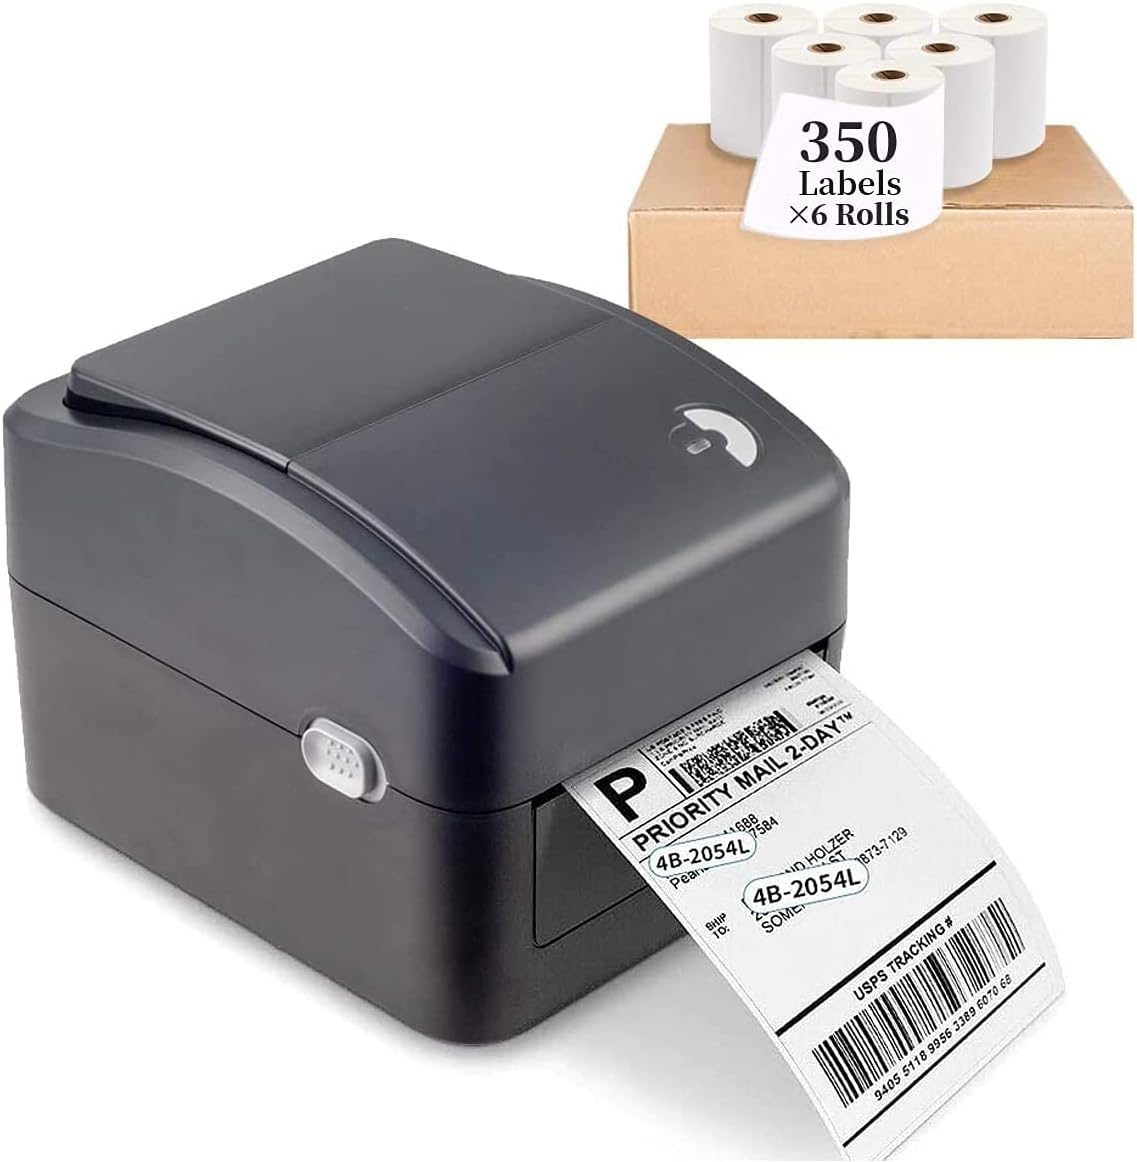 635697e1ef09b5291514df53 shipping label printer with labels